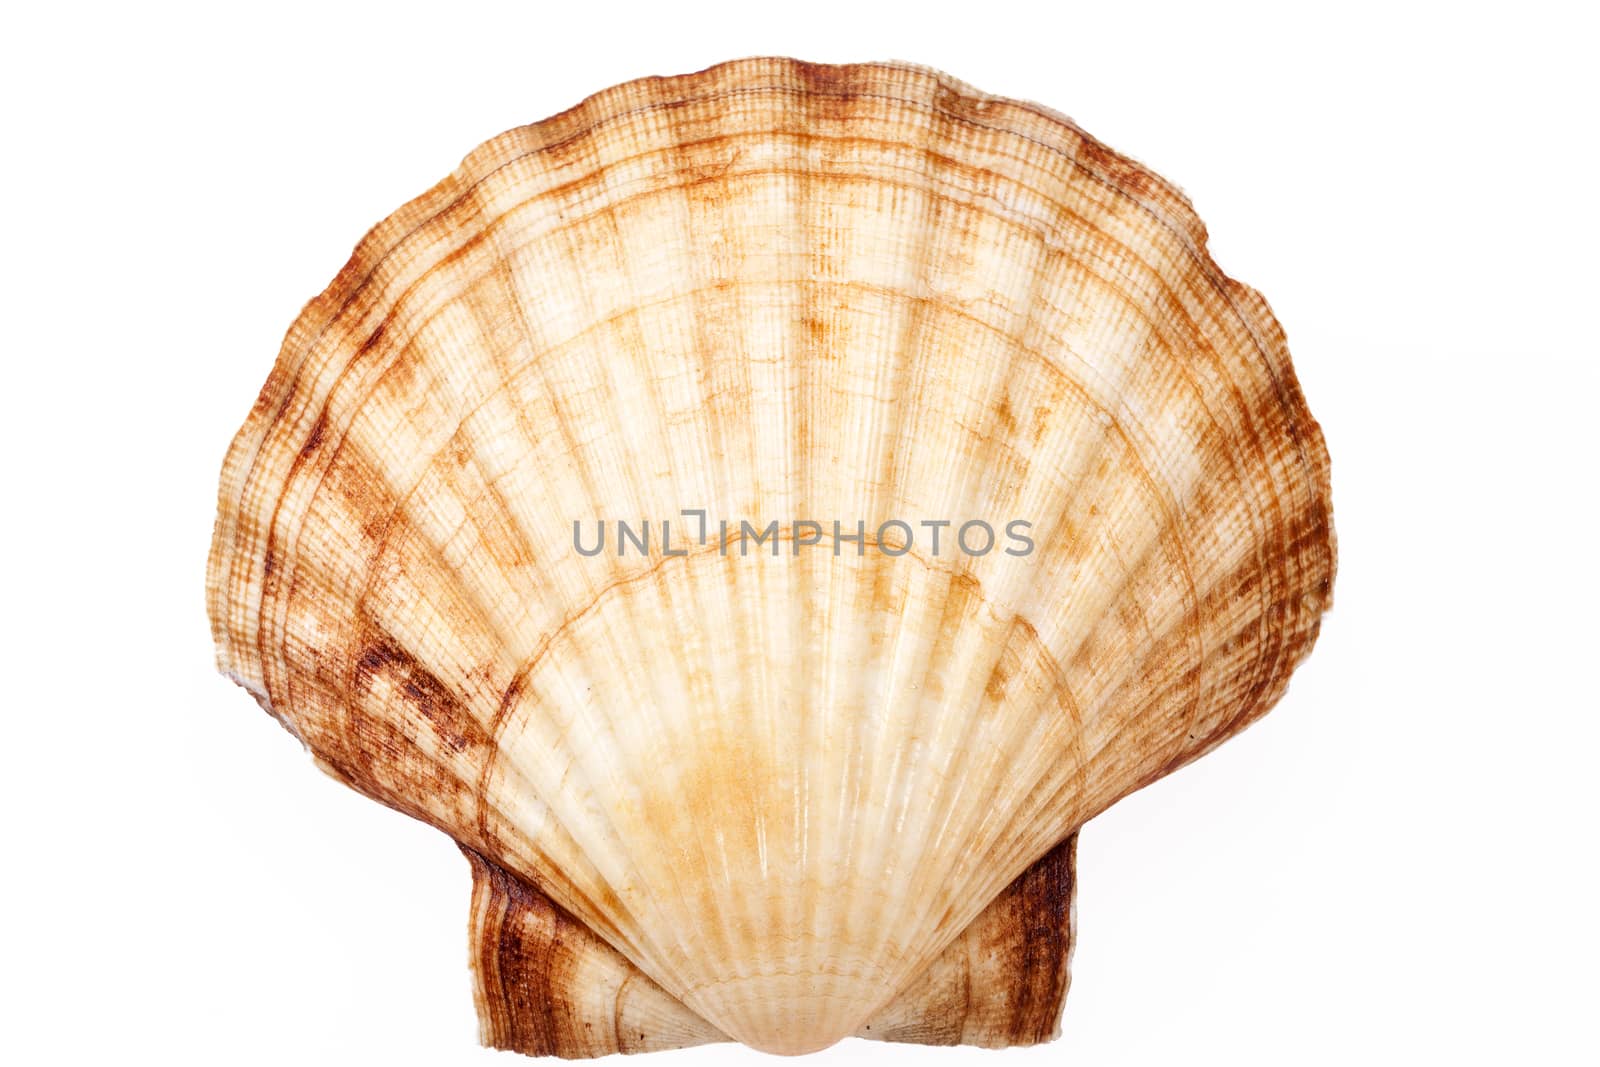 single sea shell of mollusk isolated on white background, close up .